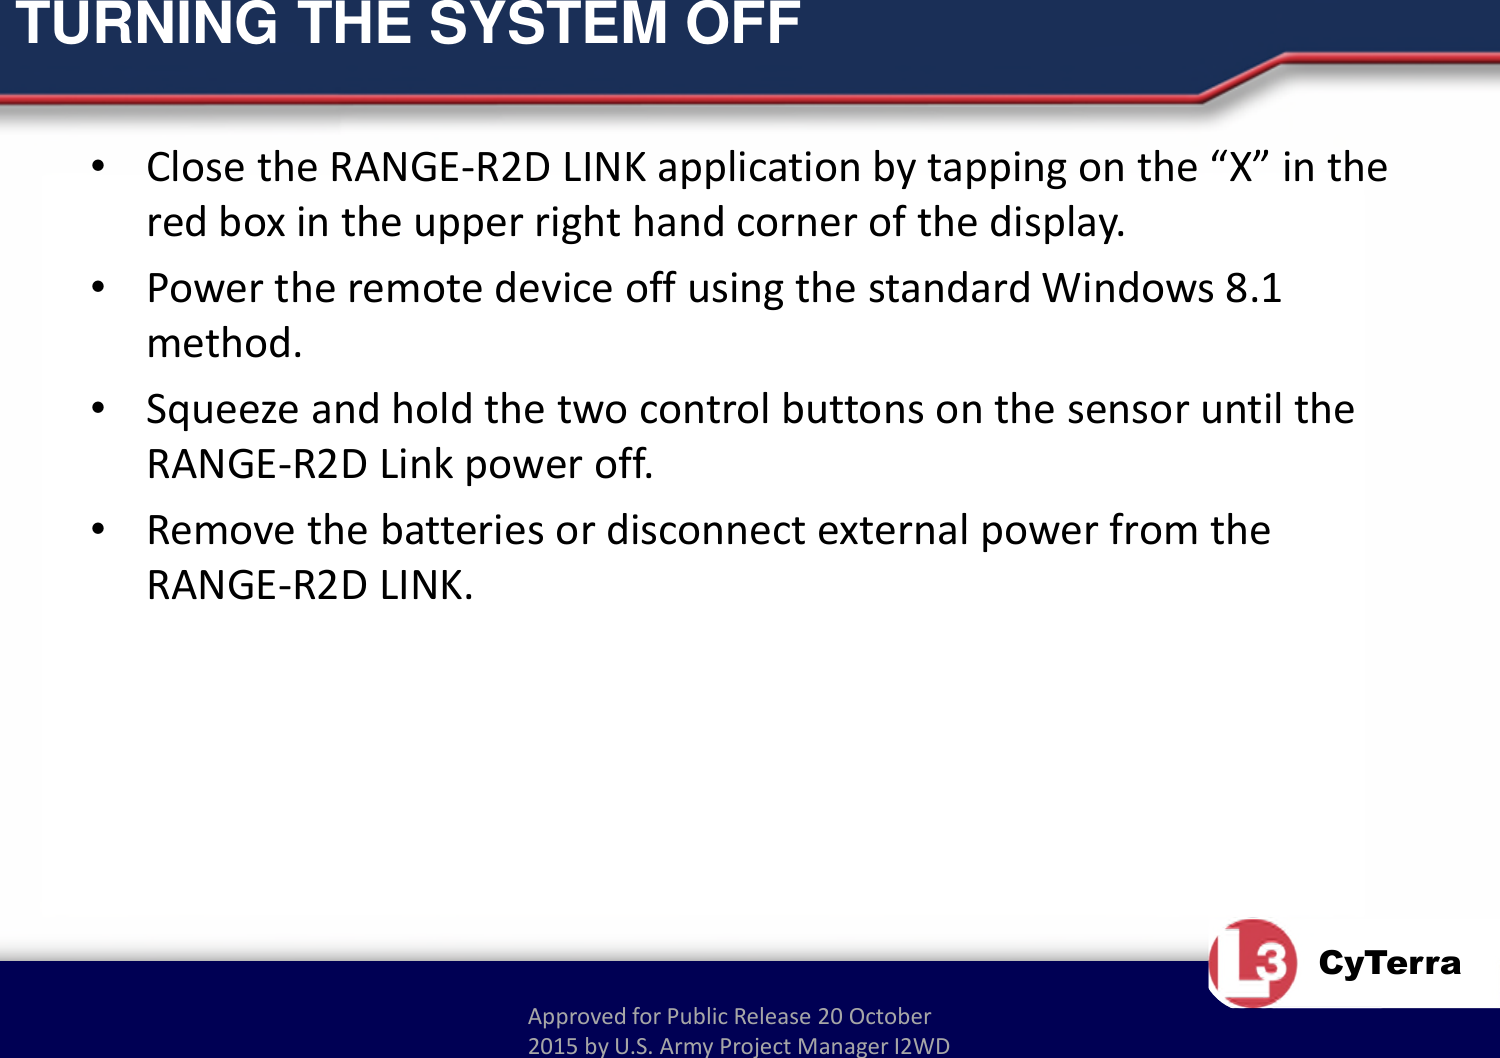 Approved for Public Release 20 October 2015 by U.S. Army Project Manager I2WDCyTerraTURNING THE SYSTEM OFF•Close the RANGE-R2D LINK application by tapping on the “X” in the red box in the upper right hand corner of the display.•Power the remote device off using the standard Windows 8.1 method.•Squeeze and hold the two control buttons on the sensor until the RANGE-R2D Link power off.•Remove the batteries or disconnect external power from the RANGE-R2D LINK.